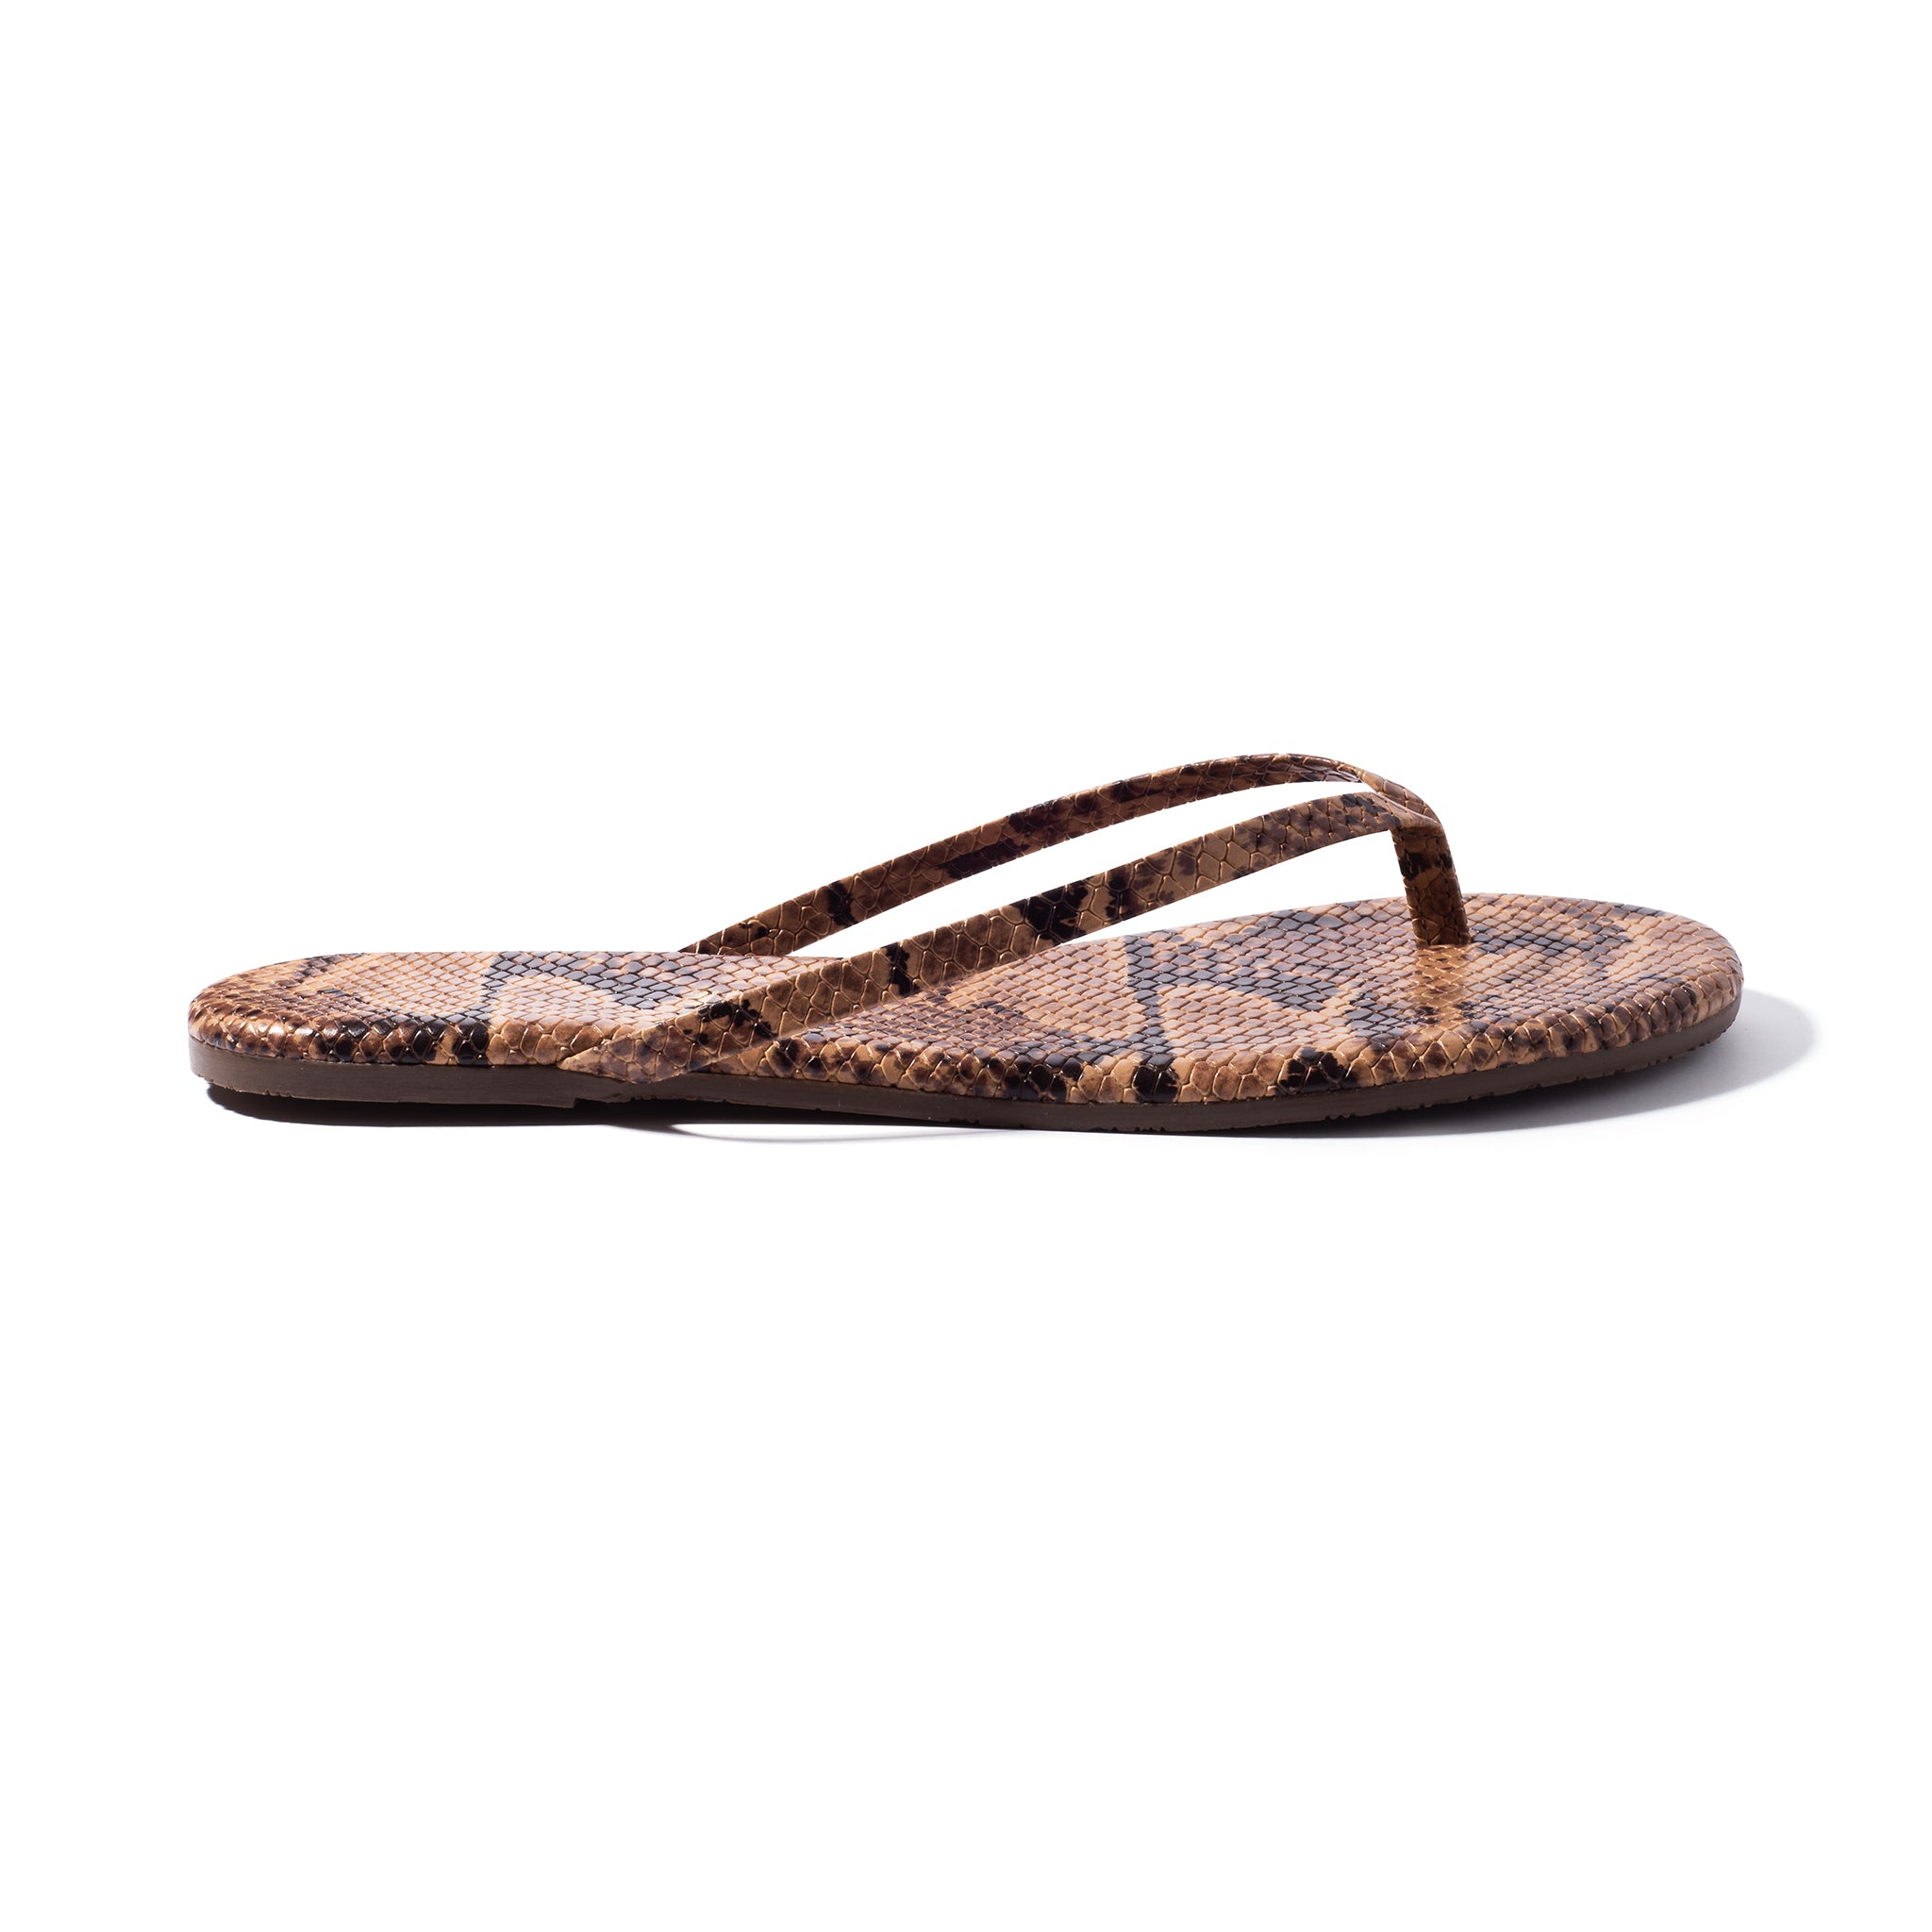 Lily Vegan Sandals - Coco Snake